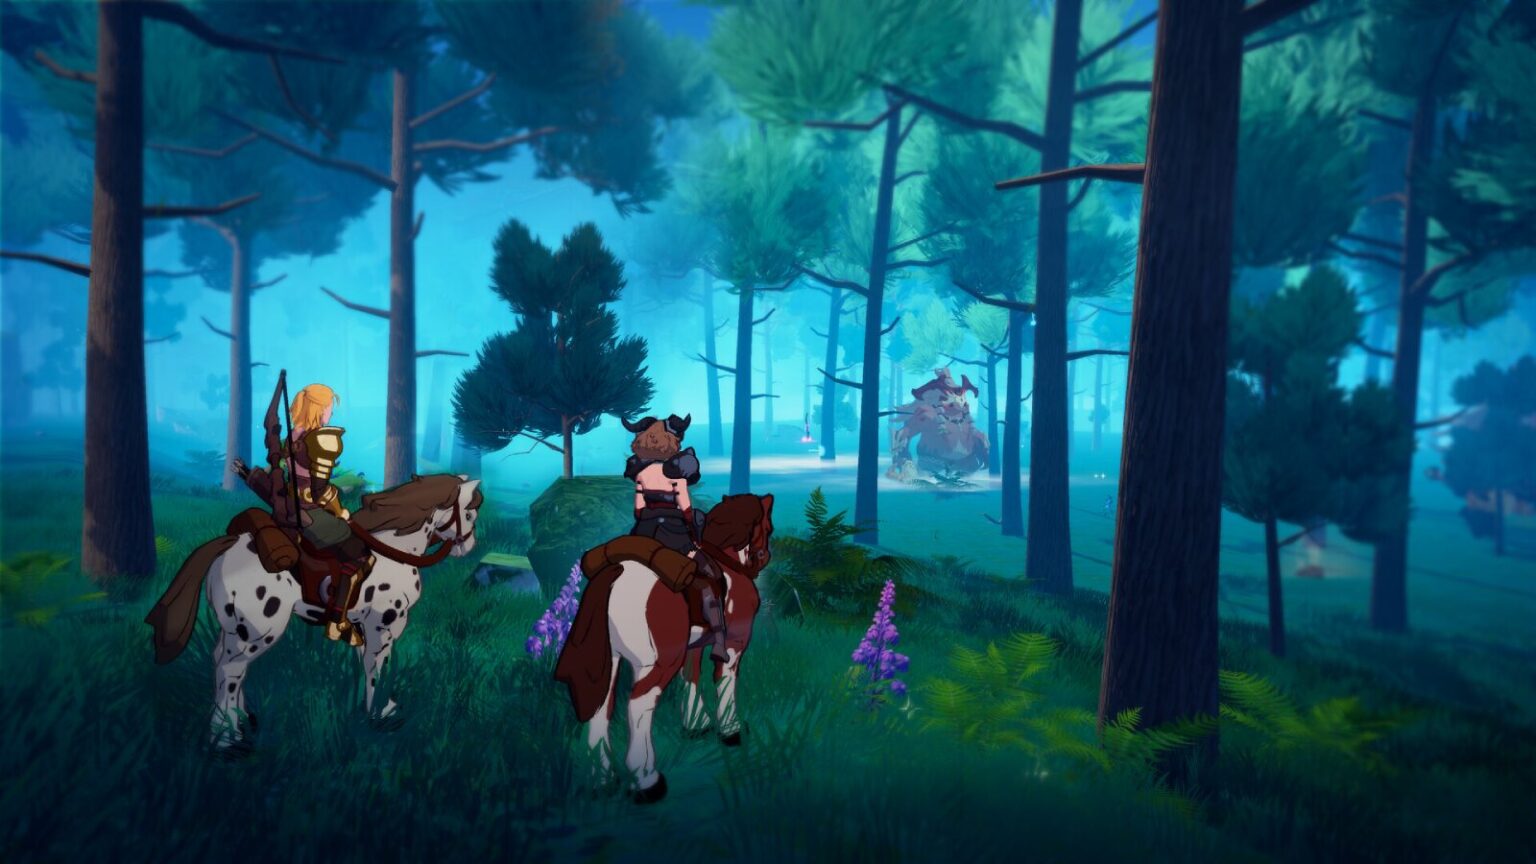 Two riders in an open world mobile game